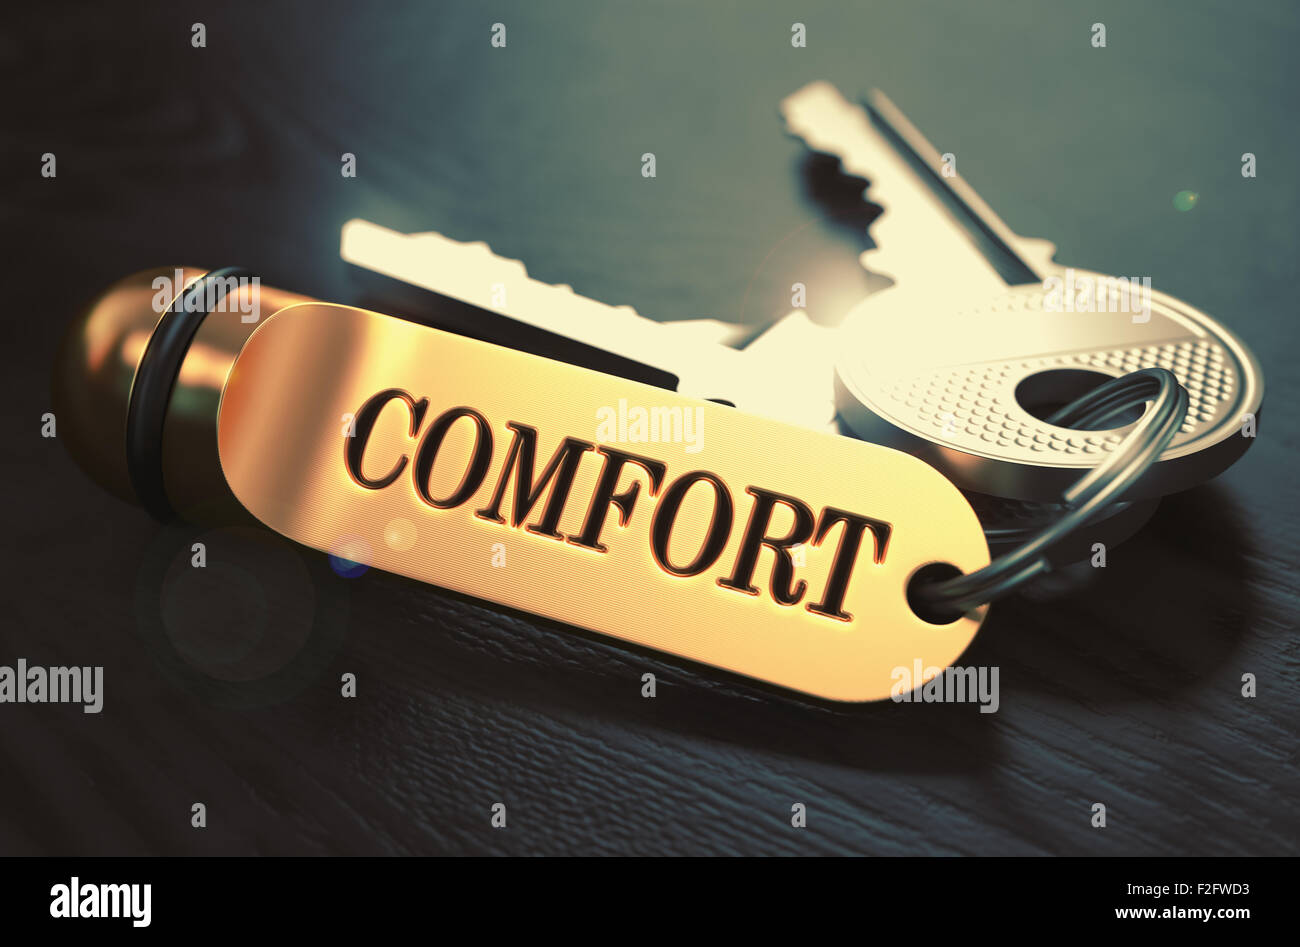 Comfort - Bunch of Keys with Text on Golden Keychain. Black Wooden Background. Closeup View with Selective Focus. 3D Illustratio Stock Photo